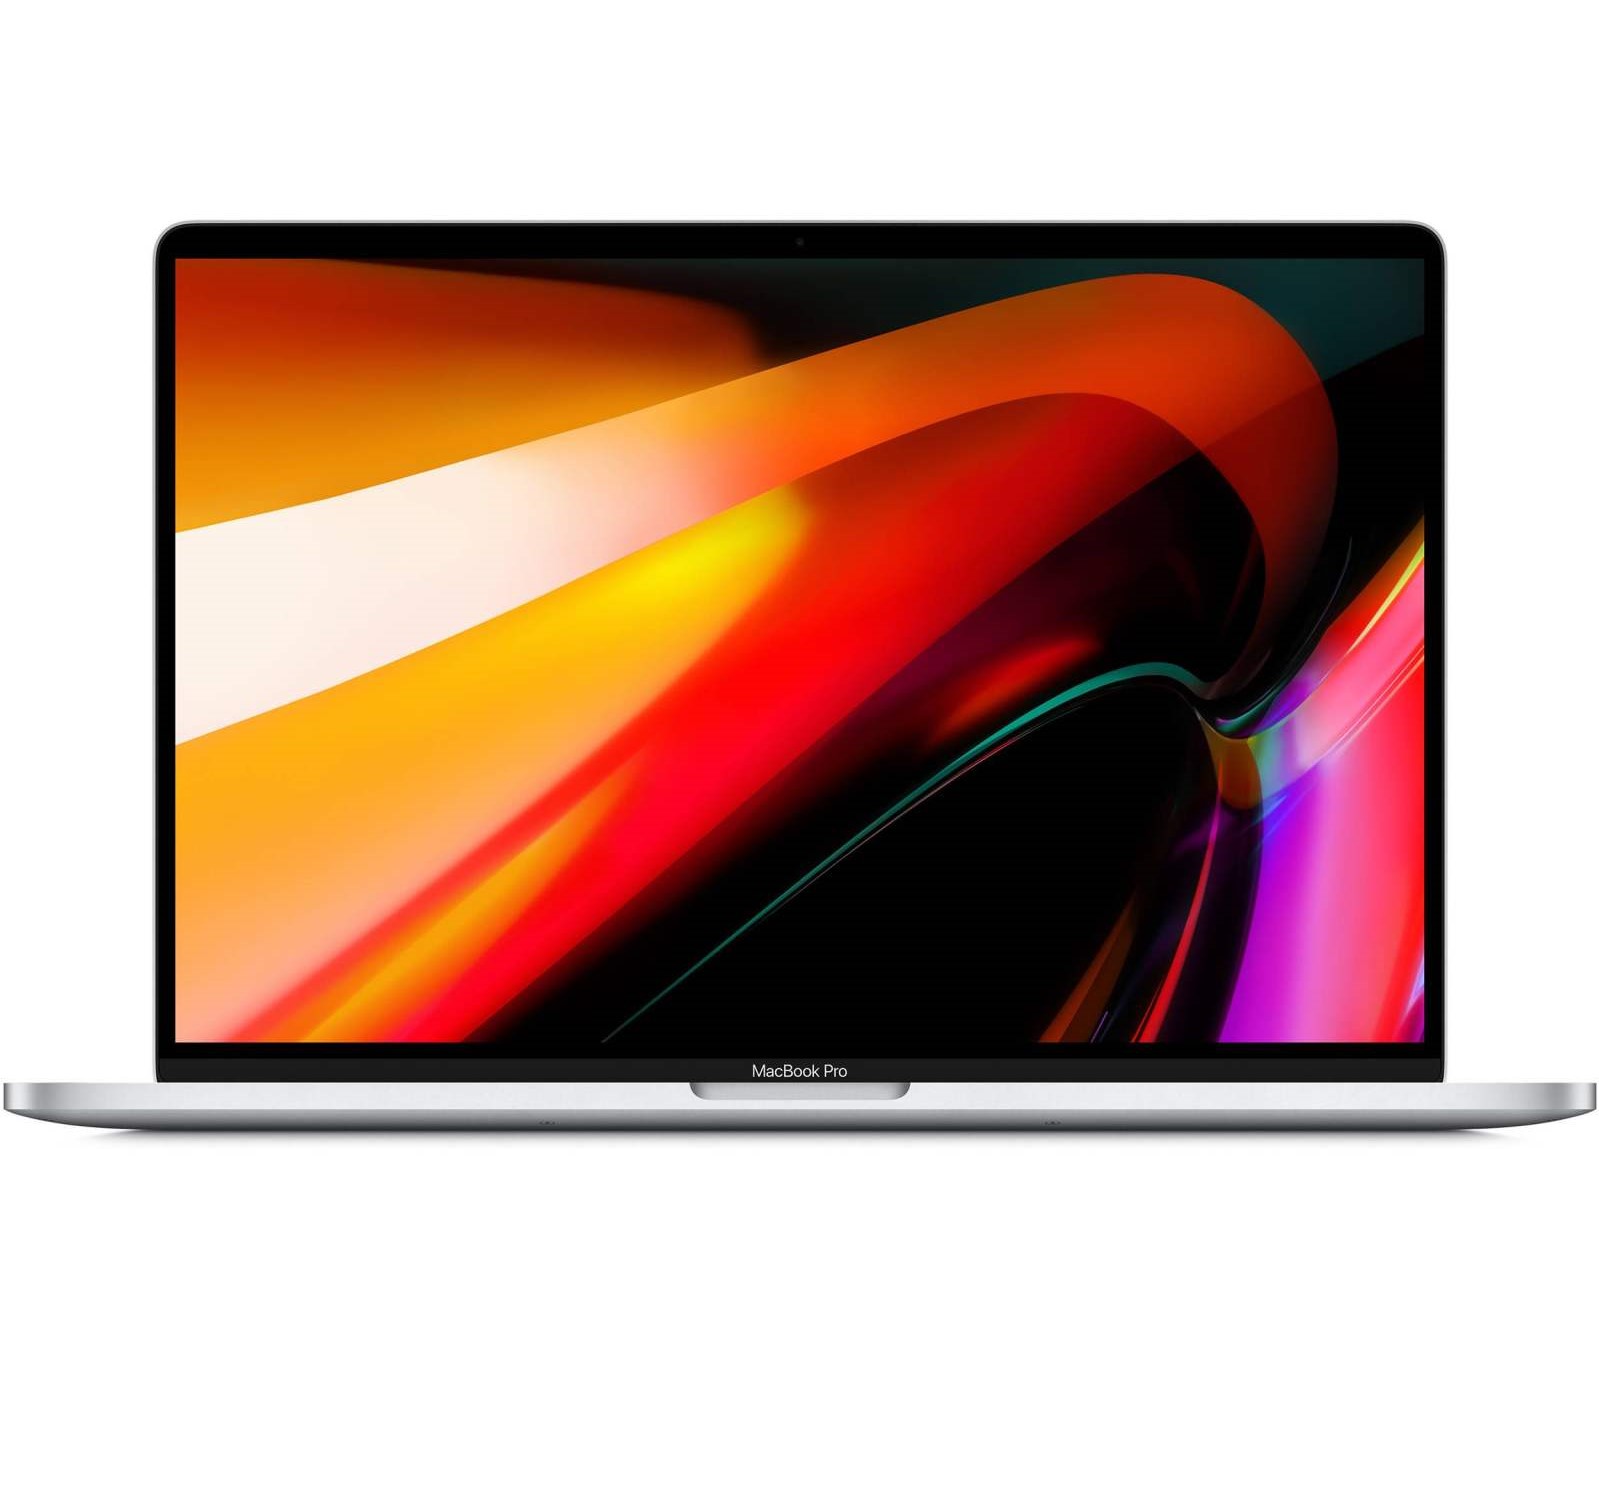 Apple MacBook Pro MVVM2 2019 - 16 inch Laptop With Touch Bar